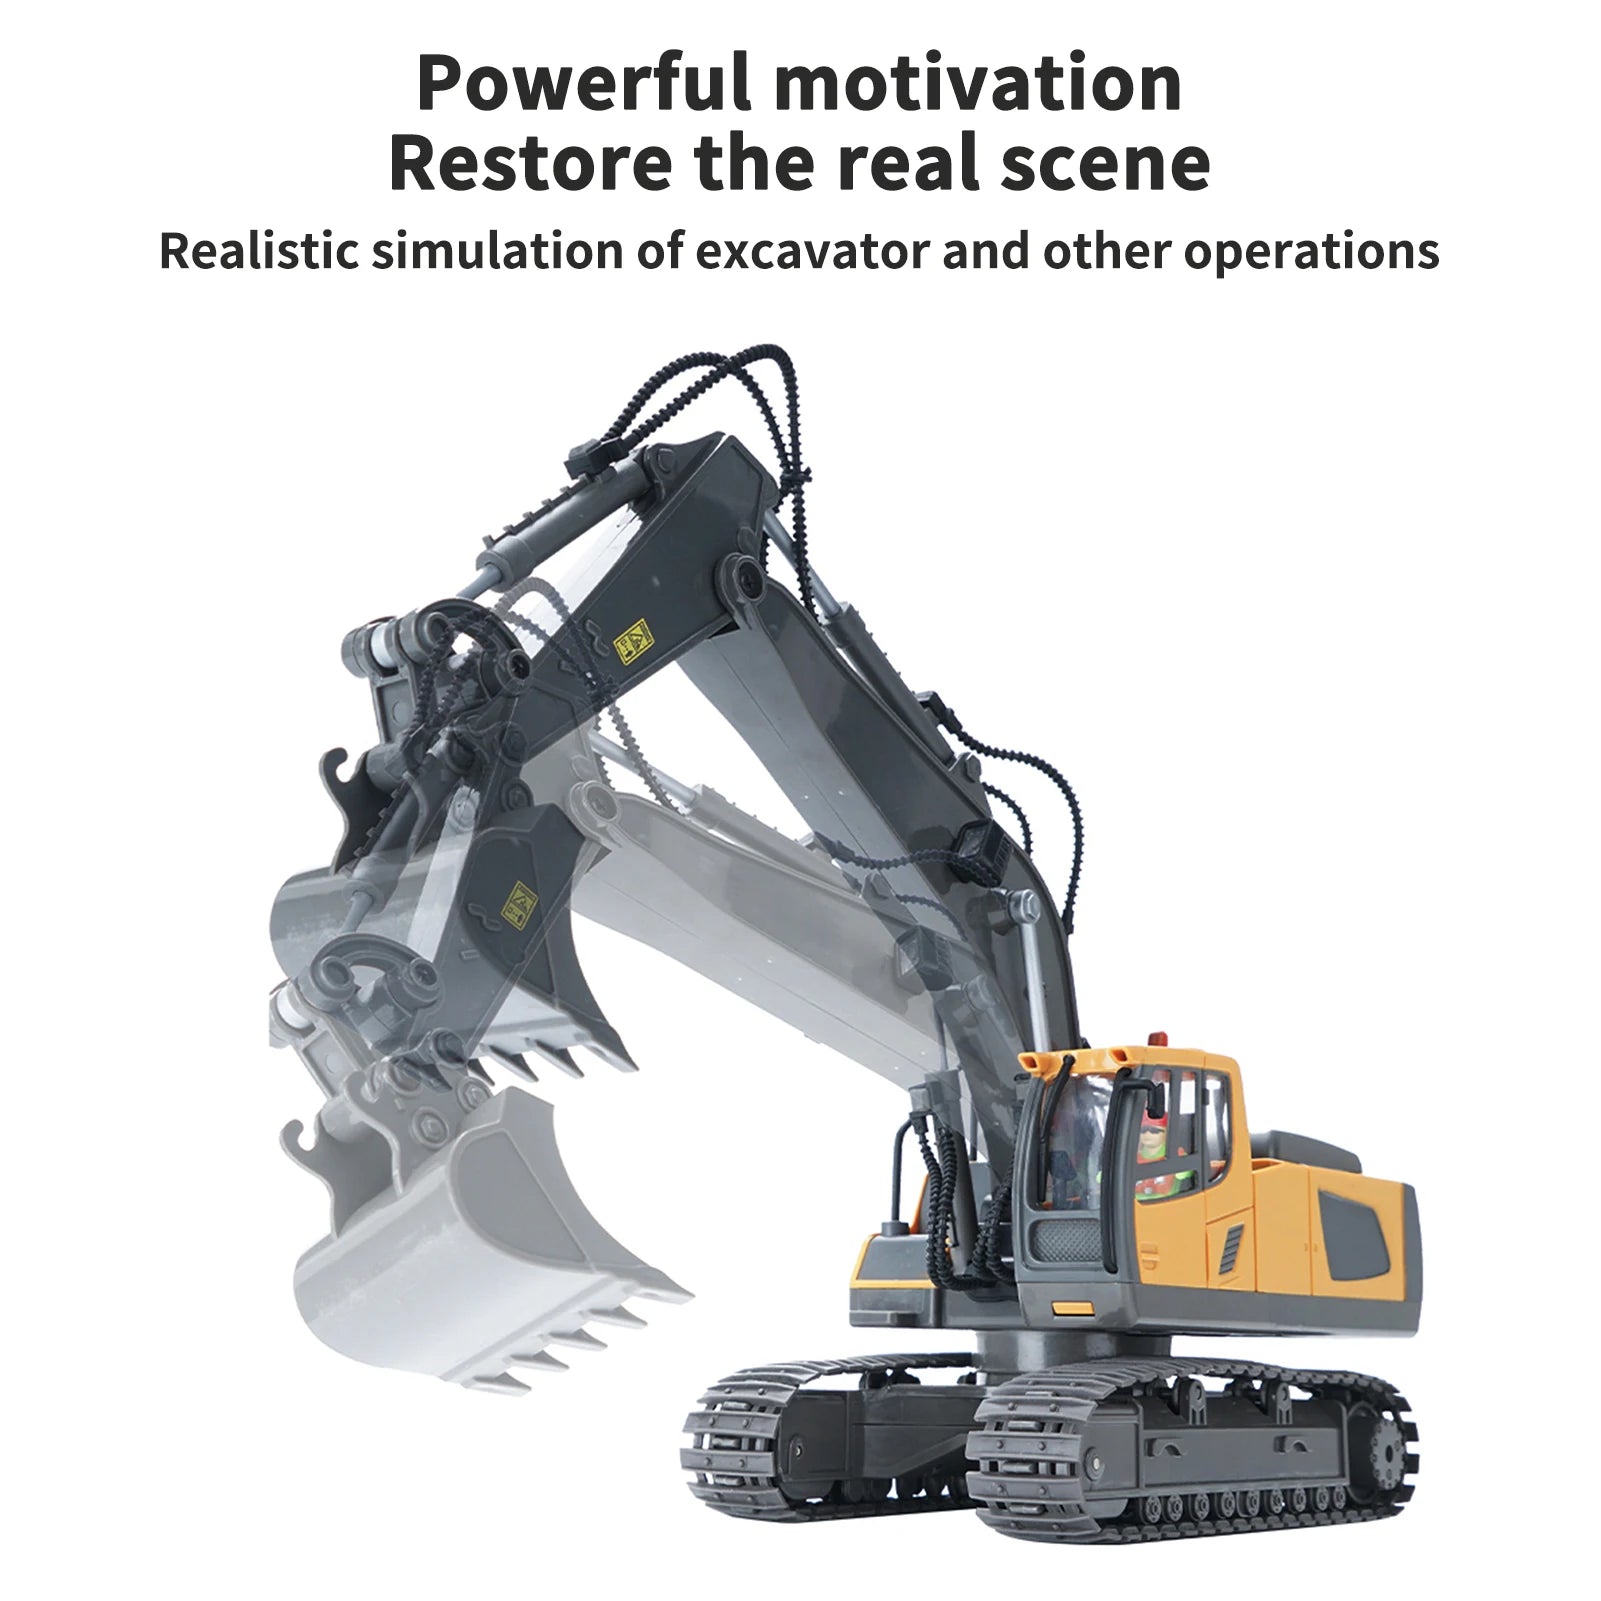 Powerful motivation Restore the real scene Realistic simulation of excavator and other